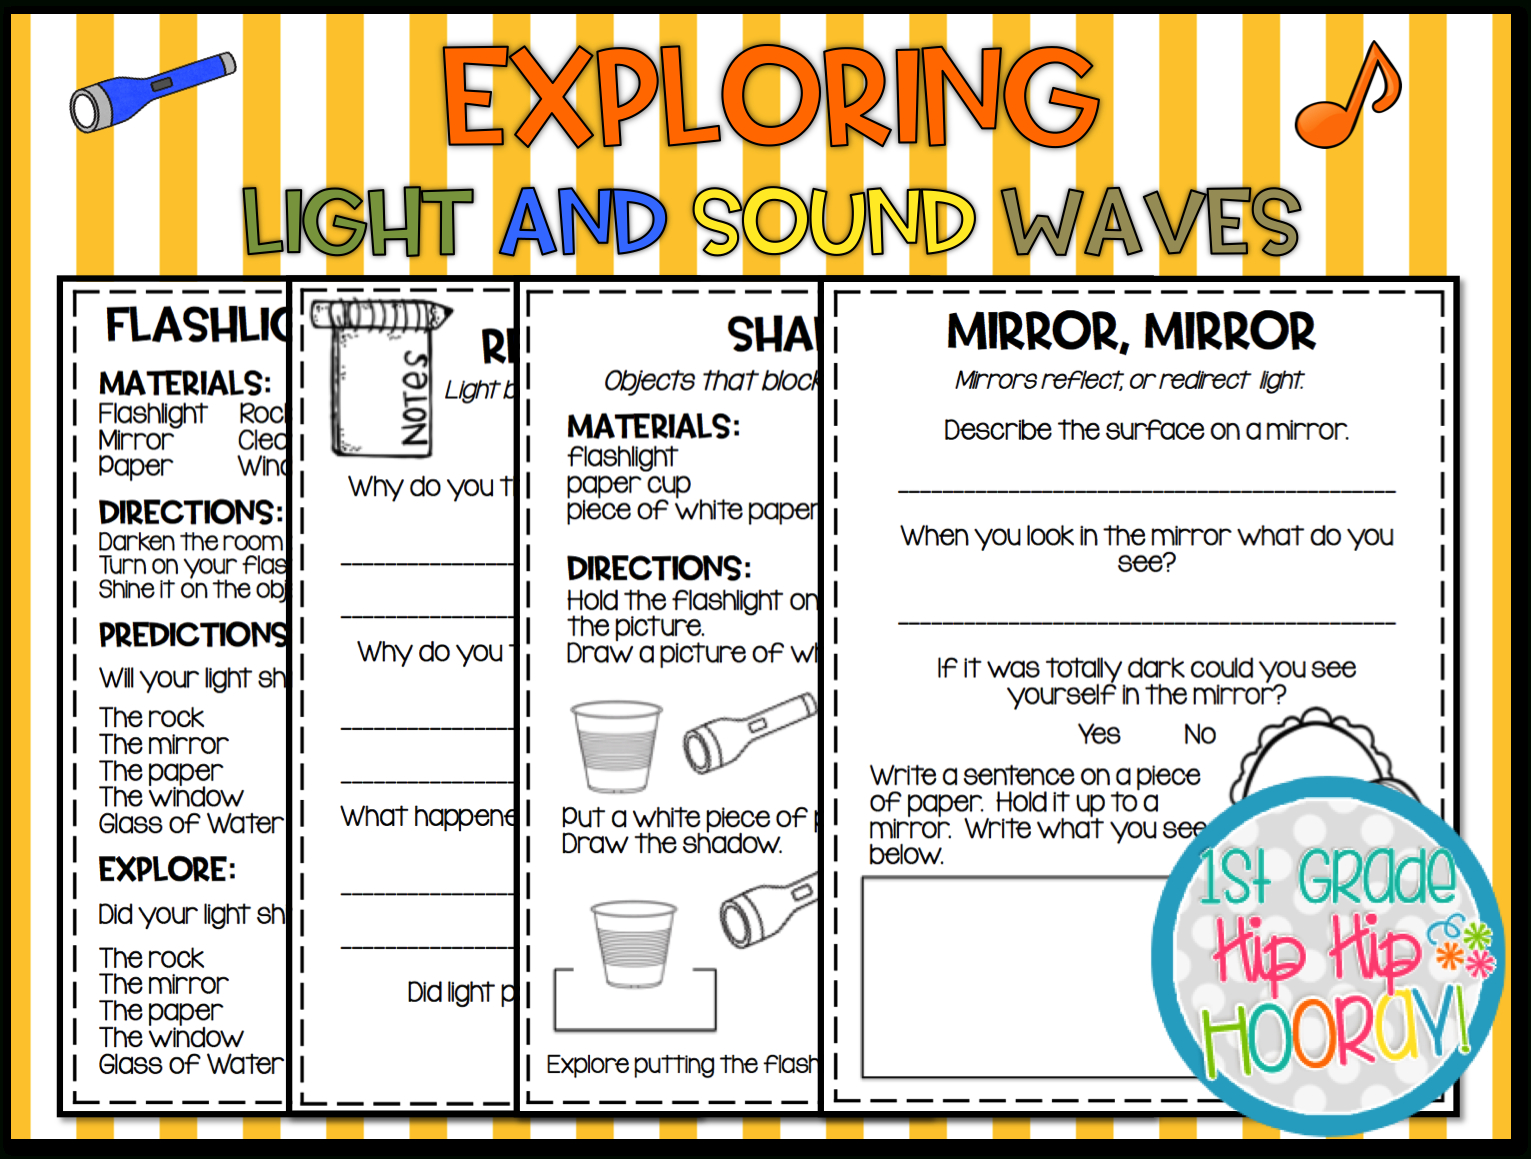 1St Grade Hip Hip Hooray!: Exploring Light And Sound Ngss